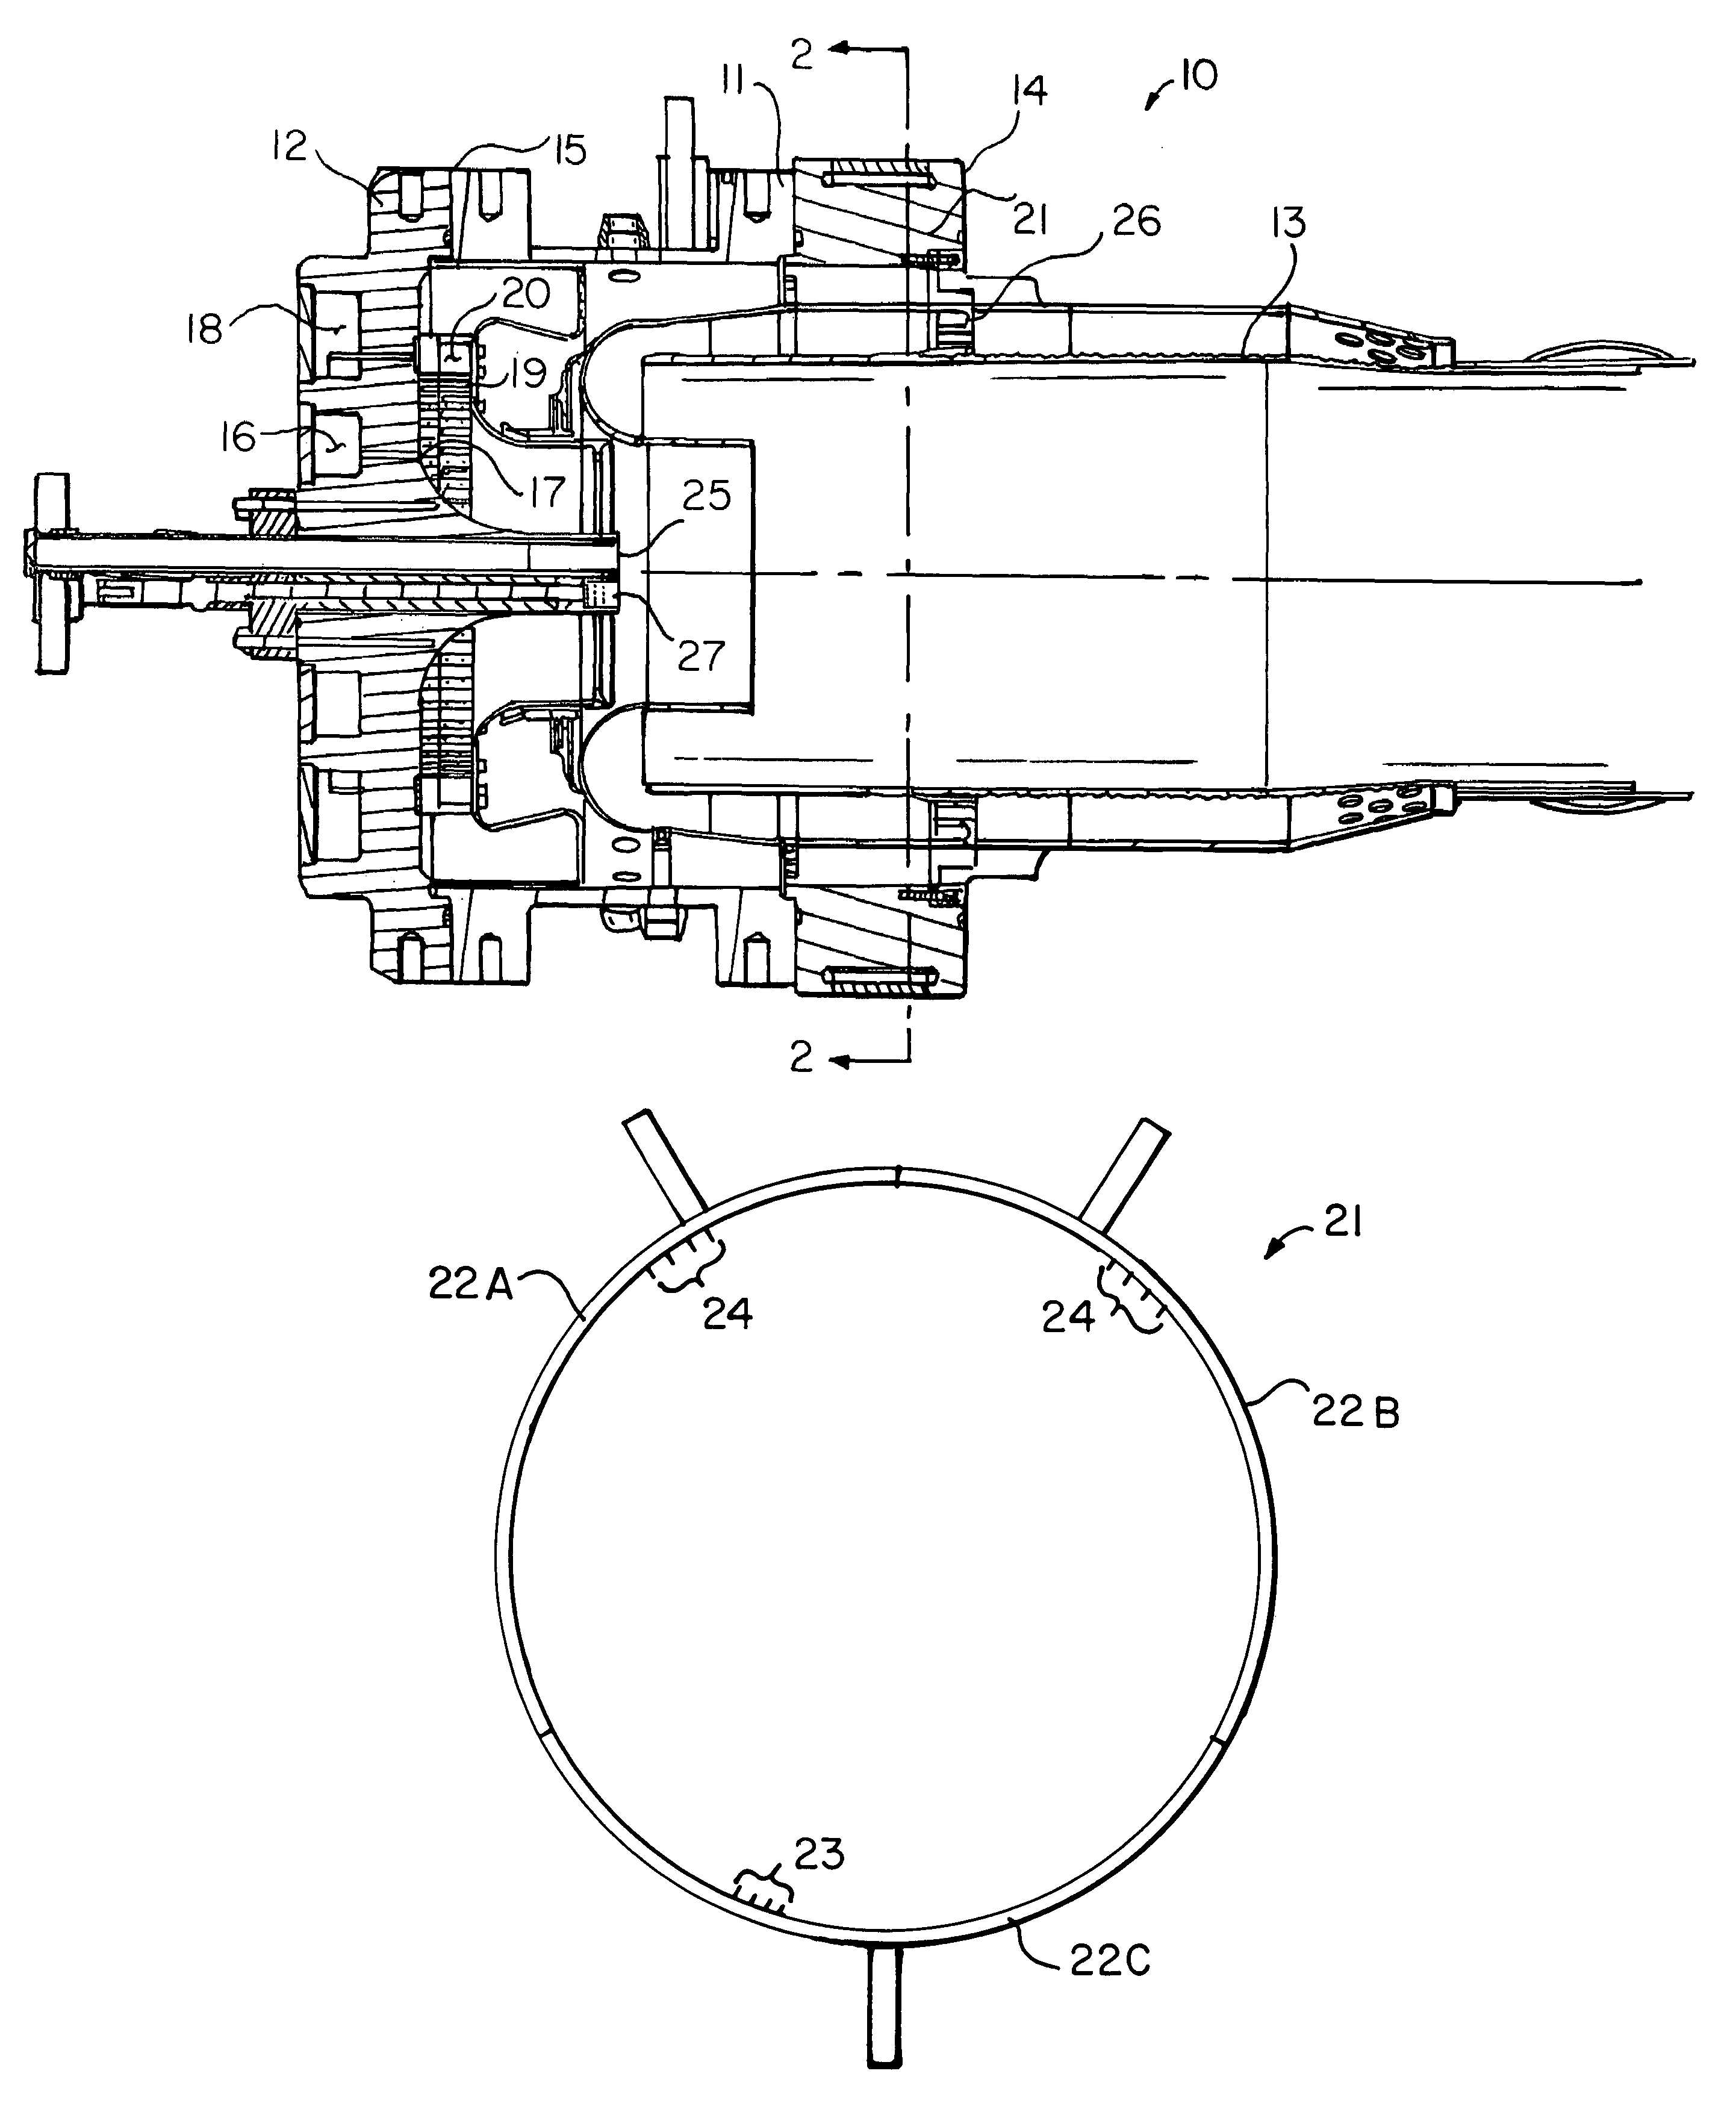 Method of operating a combustion system for increased turndown capability